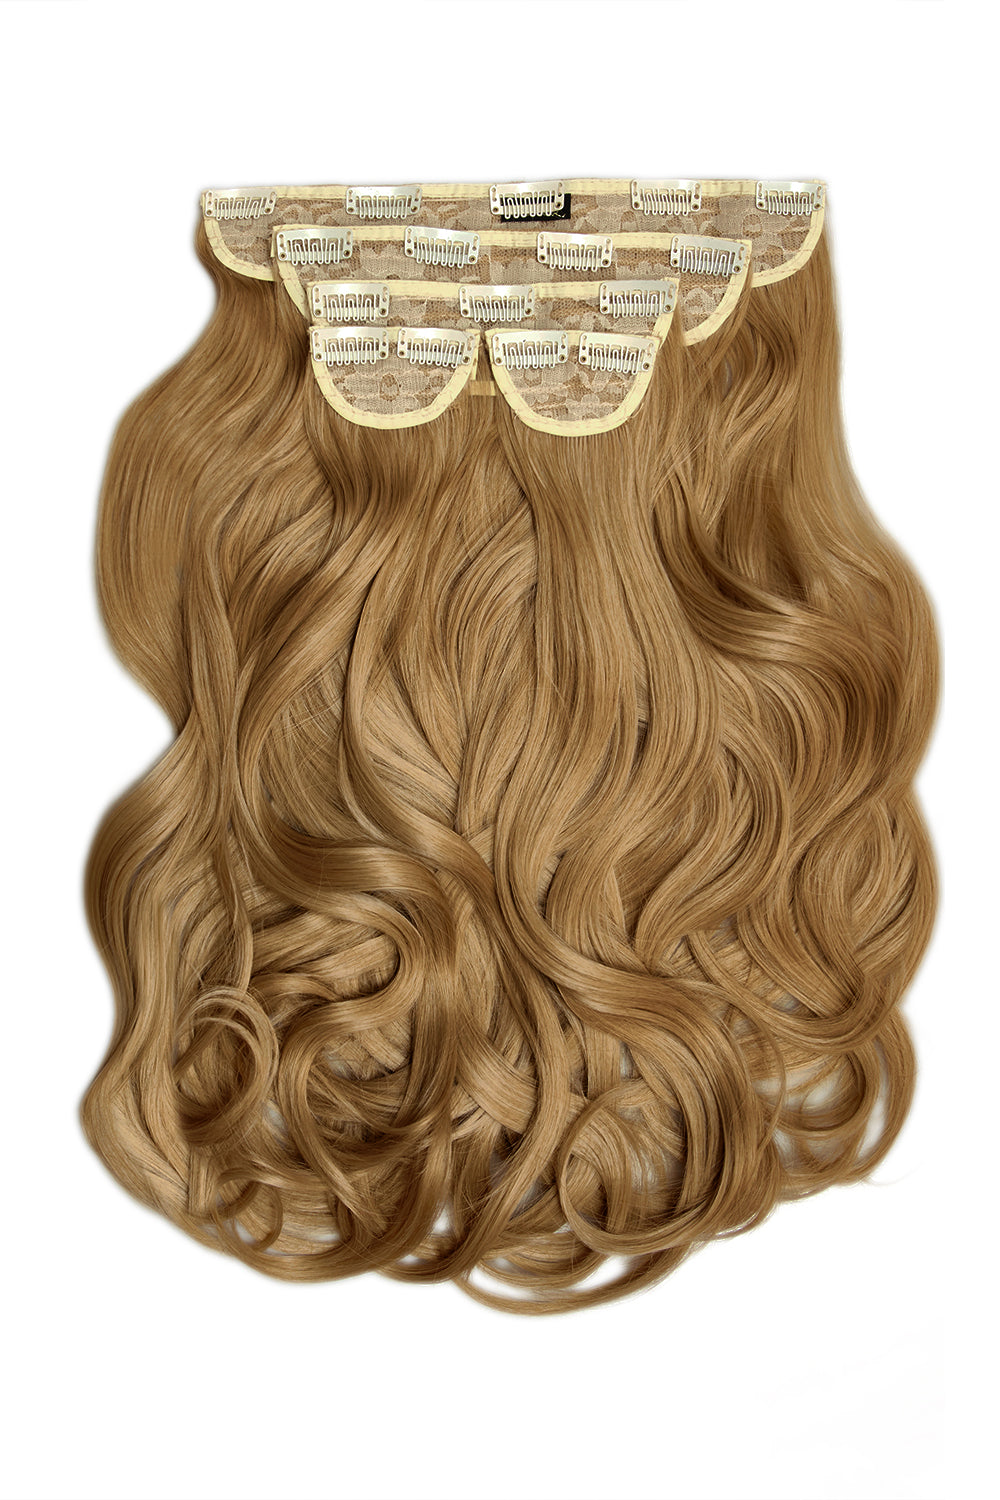 Super Thick 22" 5 Piece Blow Dry Wavy Clip In Hair Extensions - Harvest Blonde